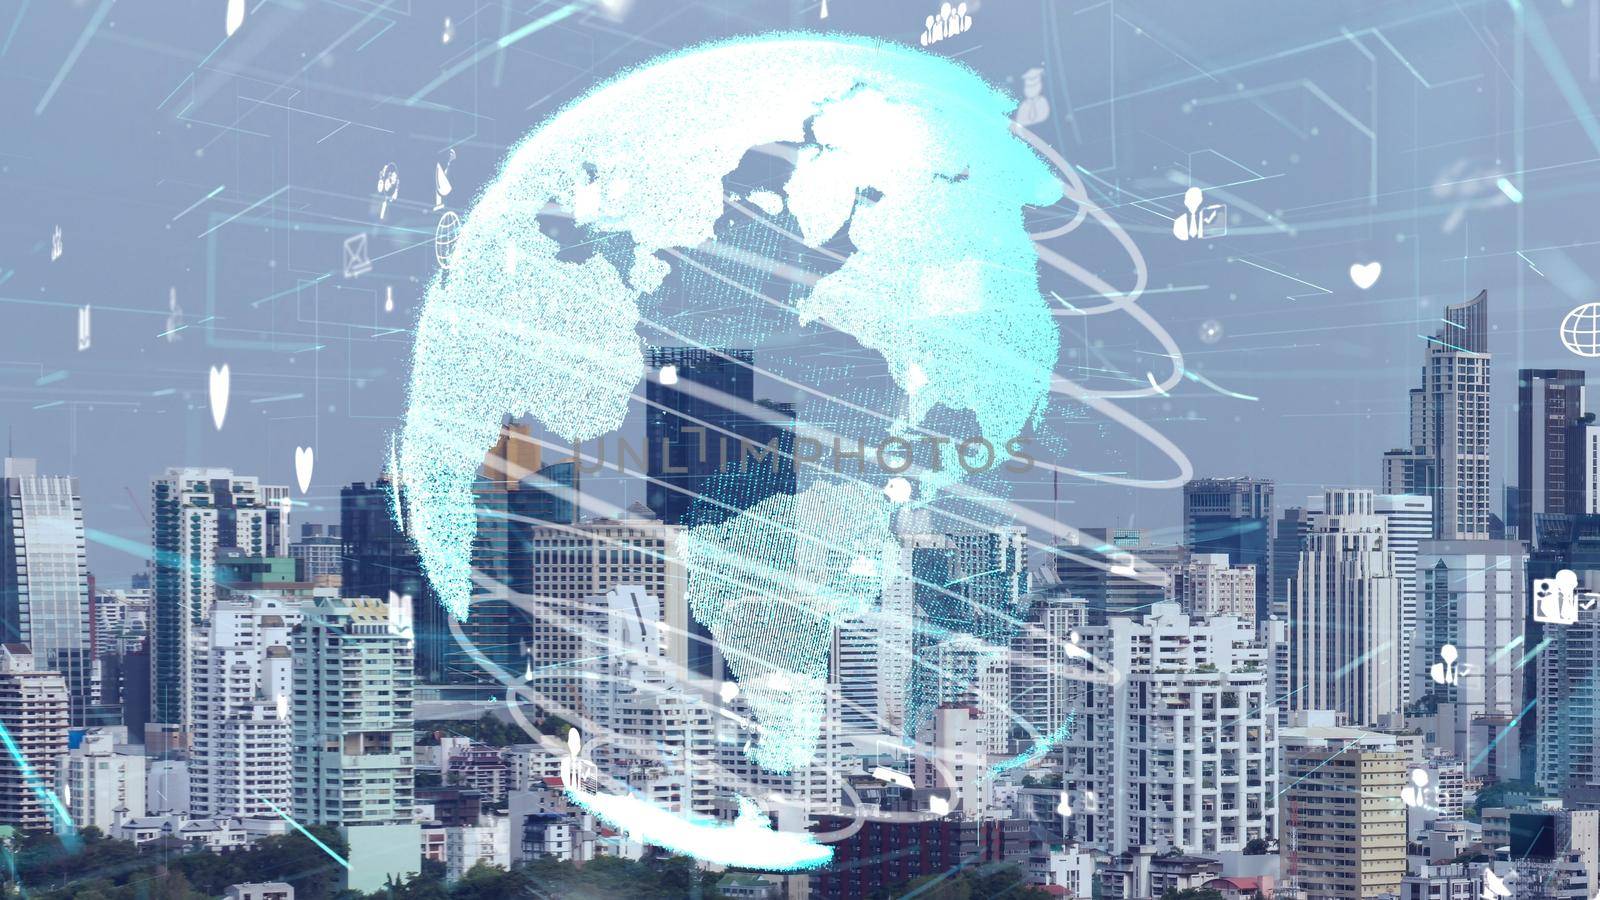 Global connection and the internet network alteration in smart city by biancoblue